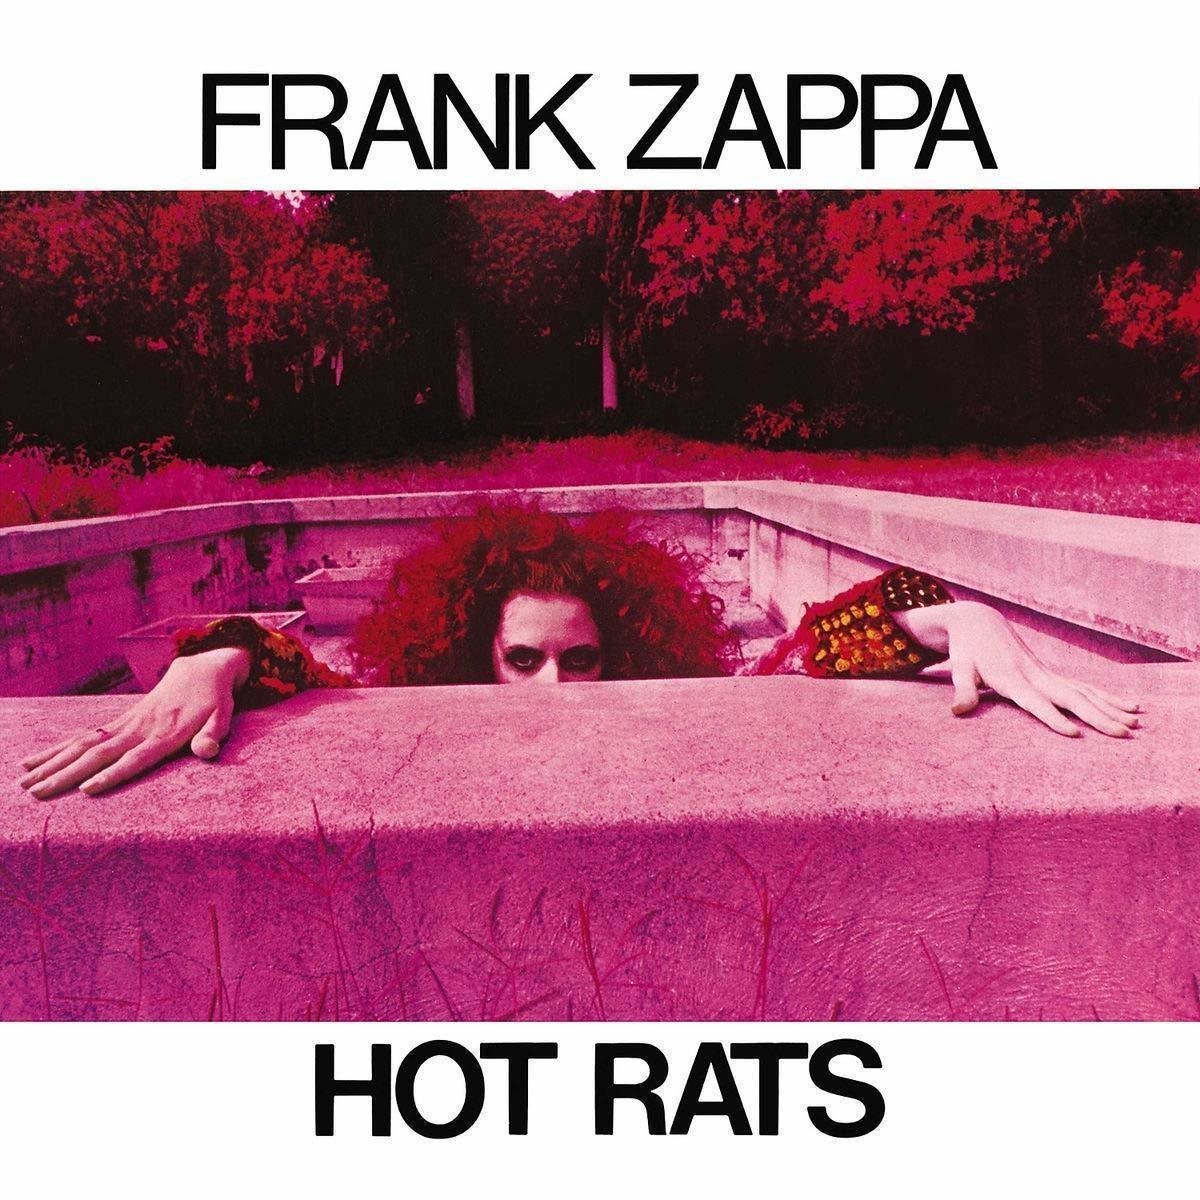 Vinyl Record Frank Zappa - The Hot Rats (Limited Edition) (LP)